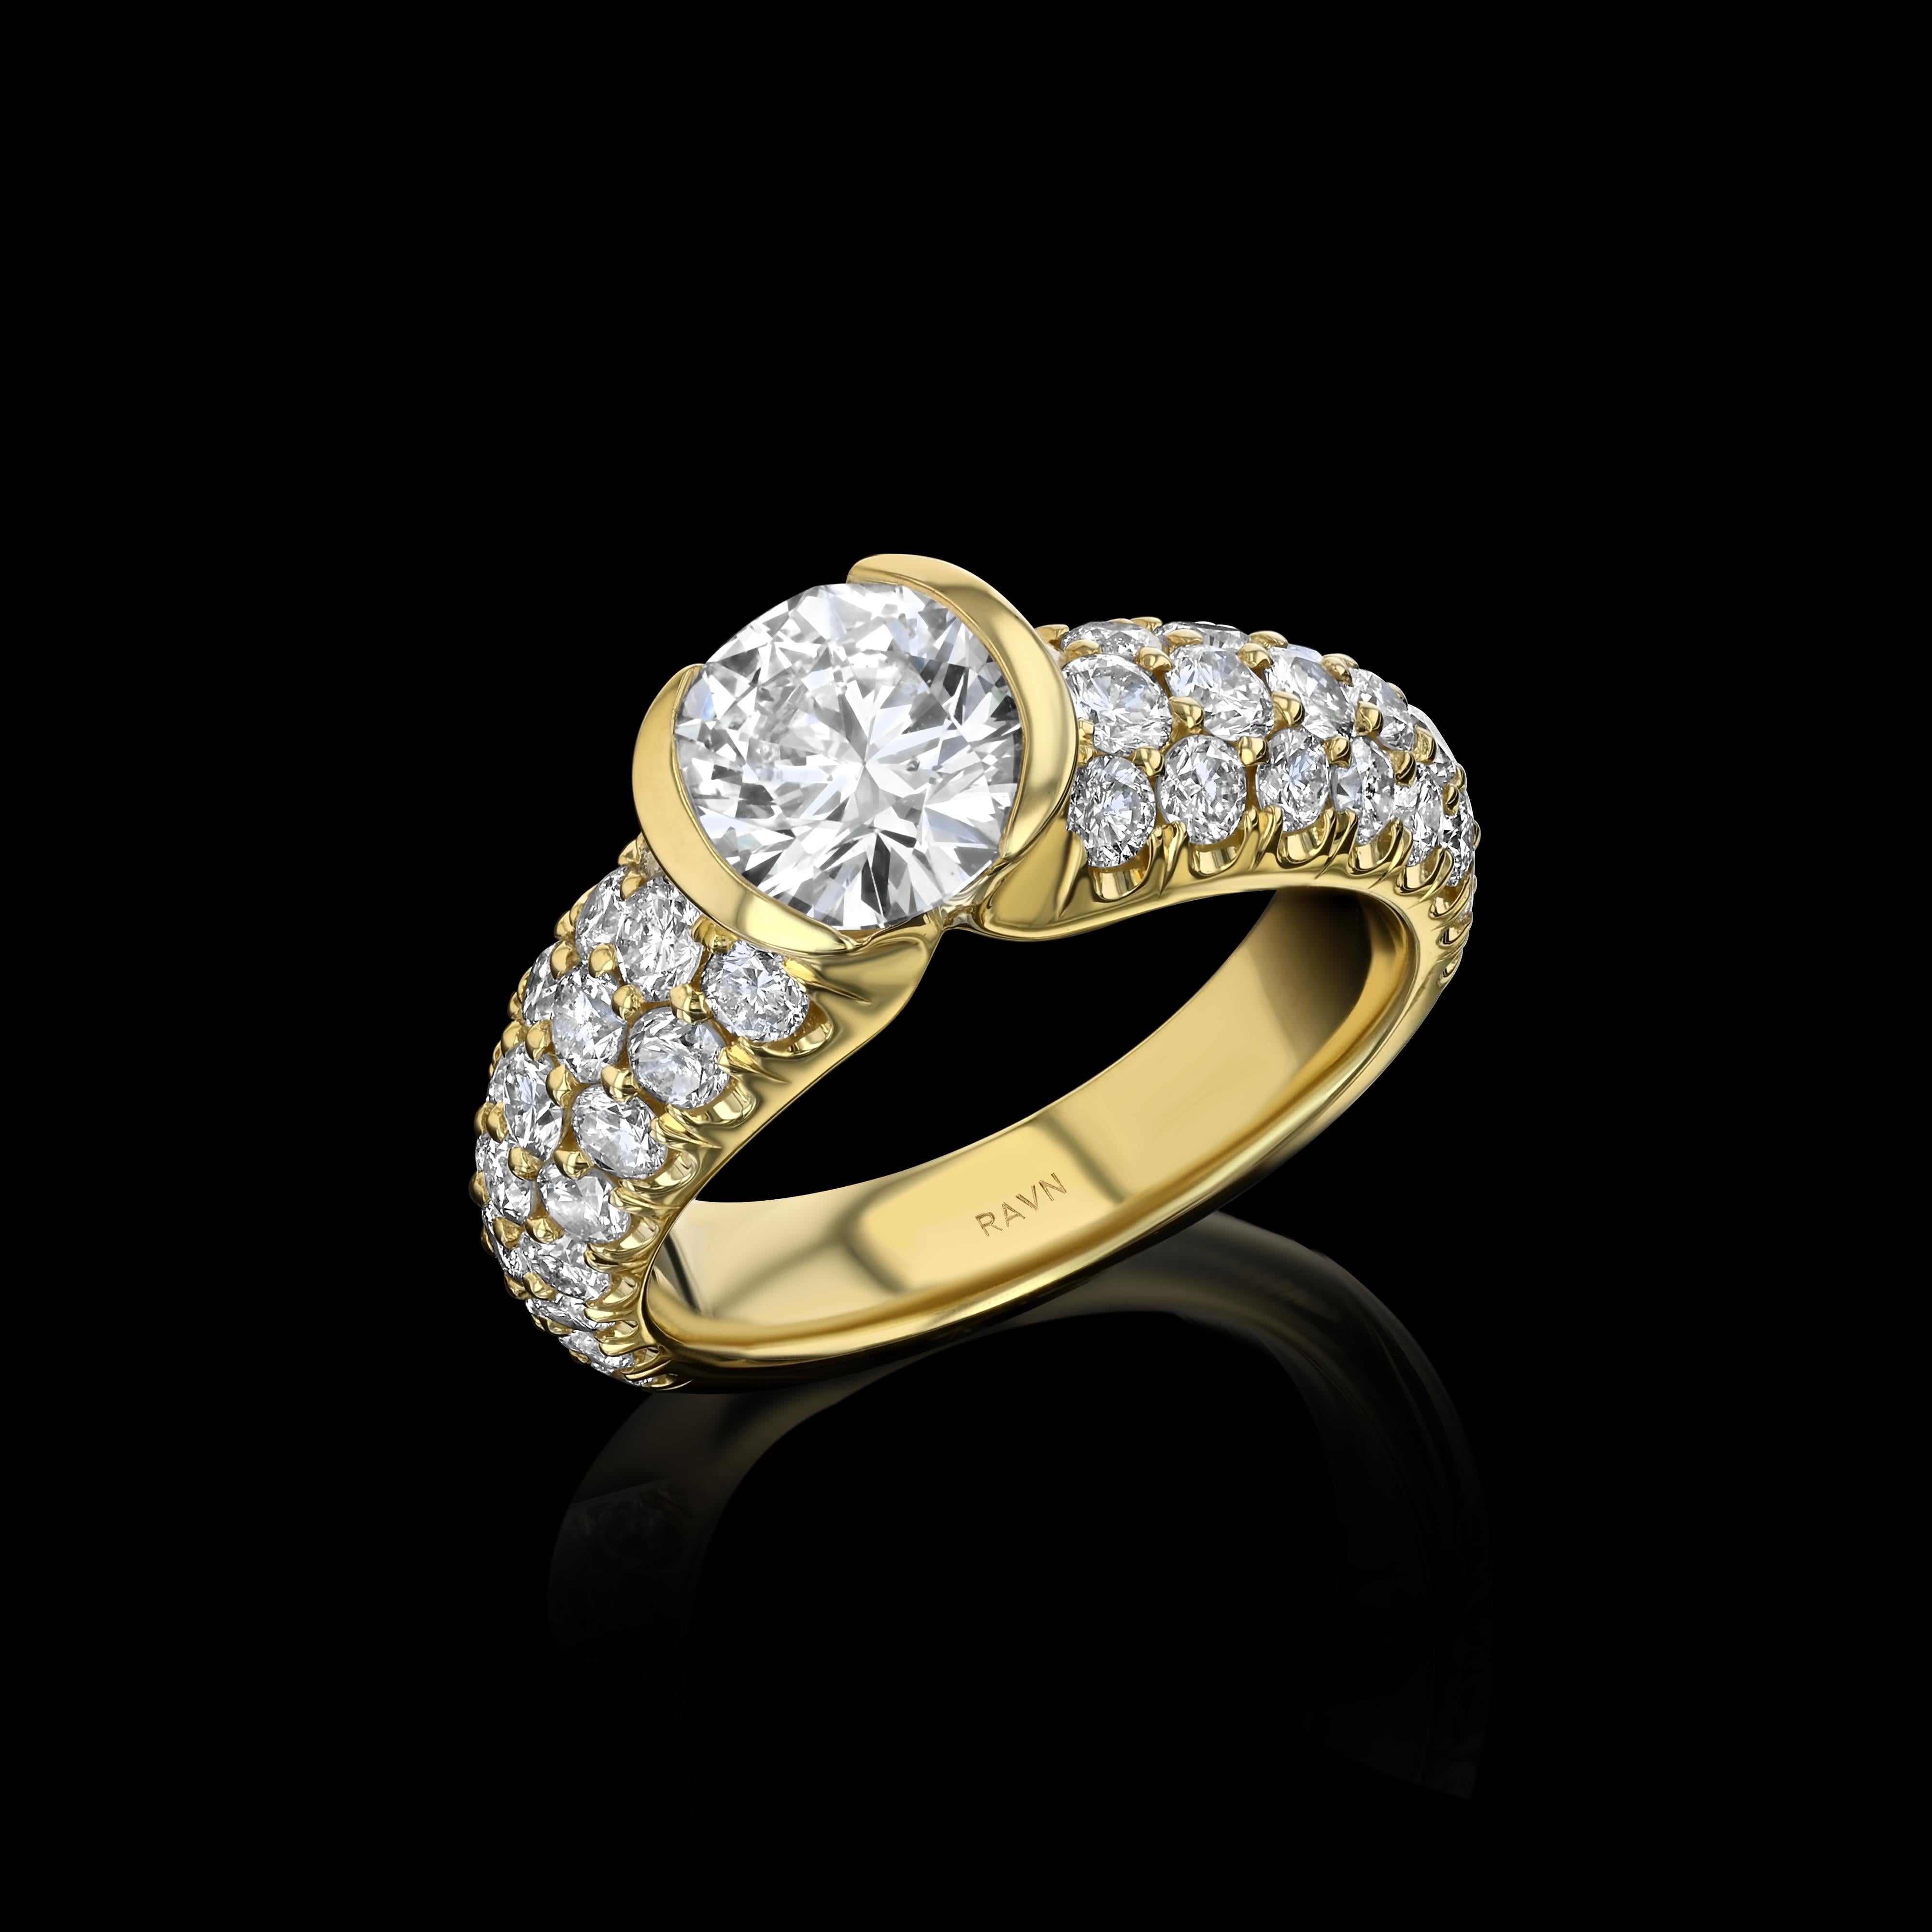 For Sale:  House of RAVN, Signature Old World Inspired Engagement Ring, 1.69ct GIA Diamond 3